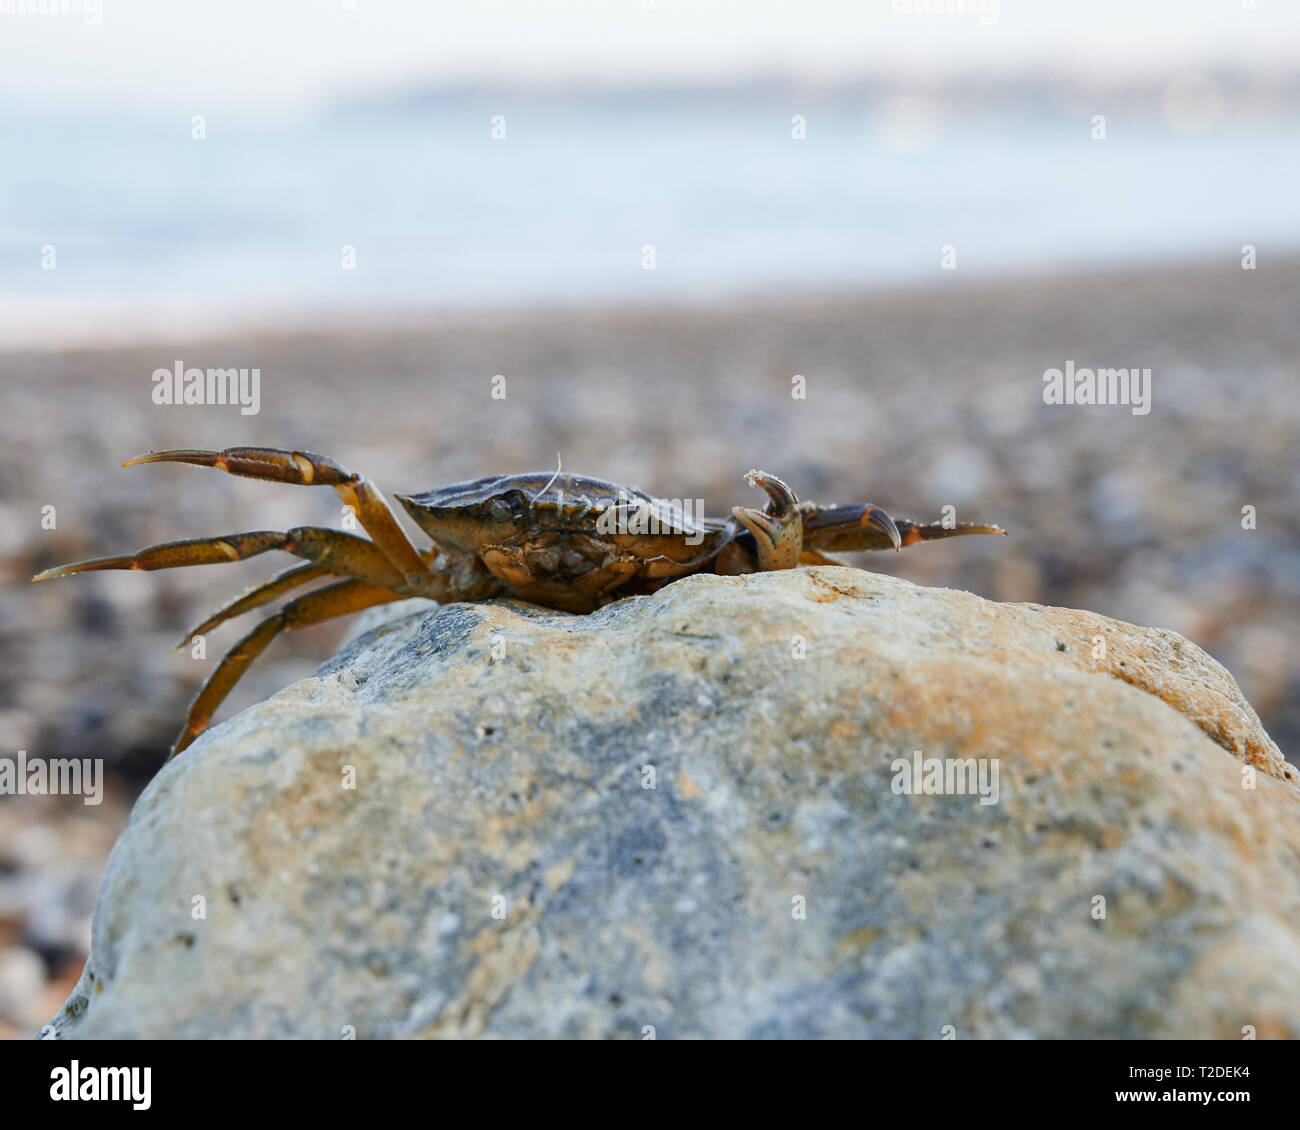 Eye level shot of a Crab summiting a rocky platform on St Helen's Beach. Lovely pastel colours in this glorious seaside scene. Stock Photo